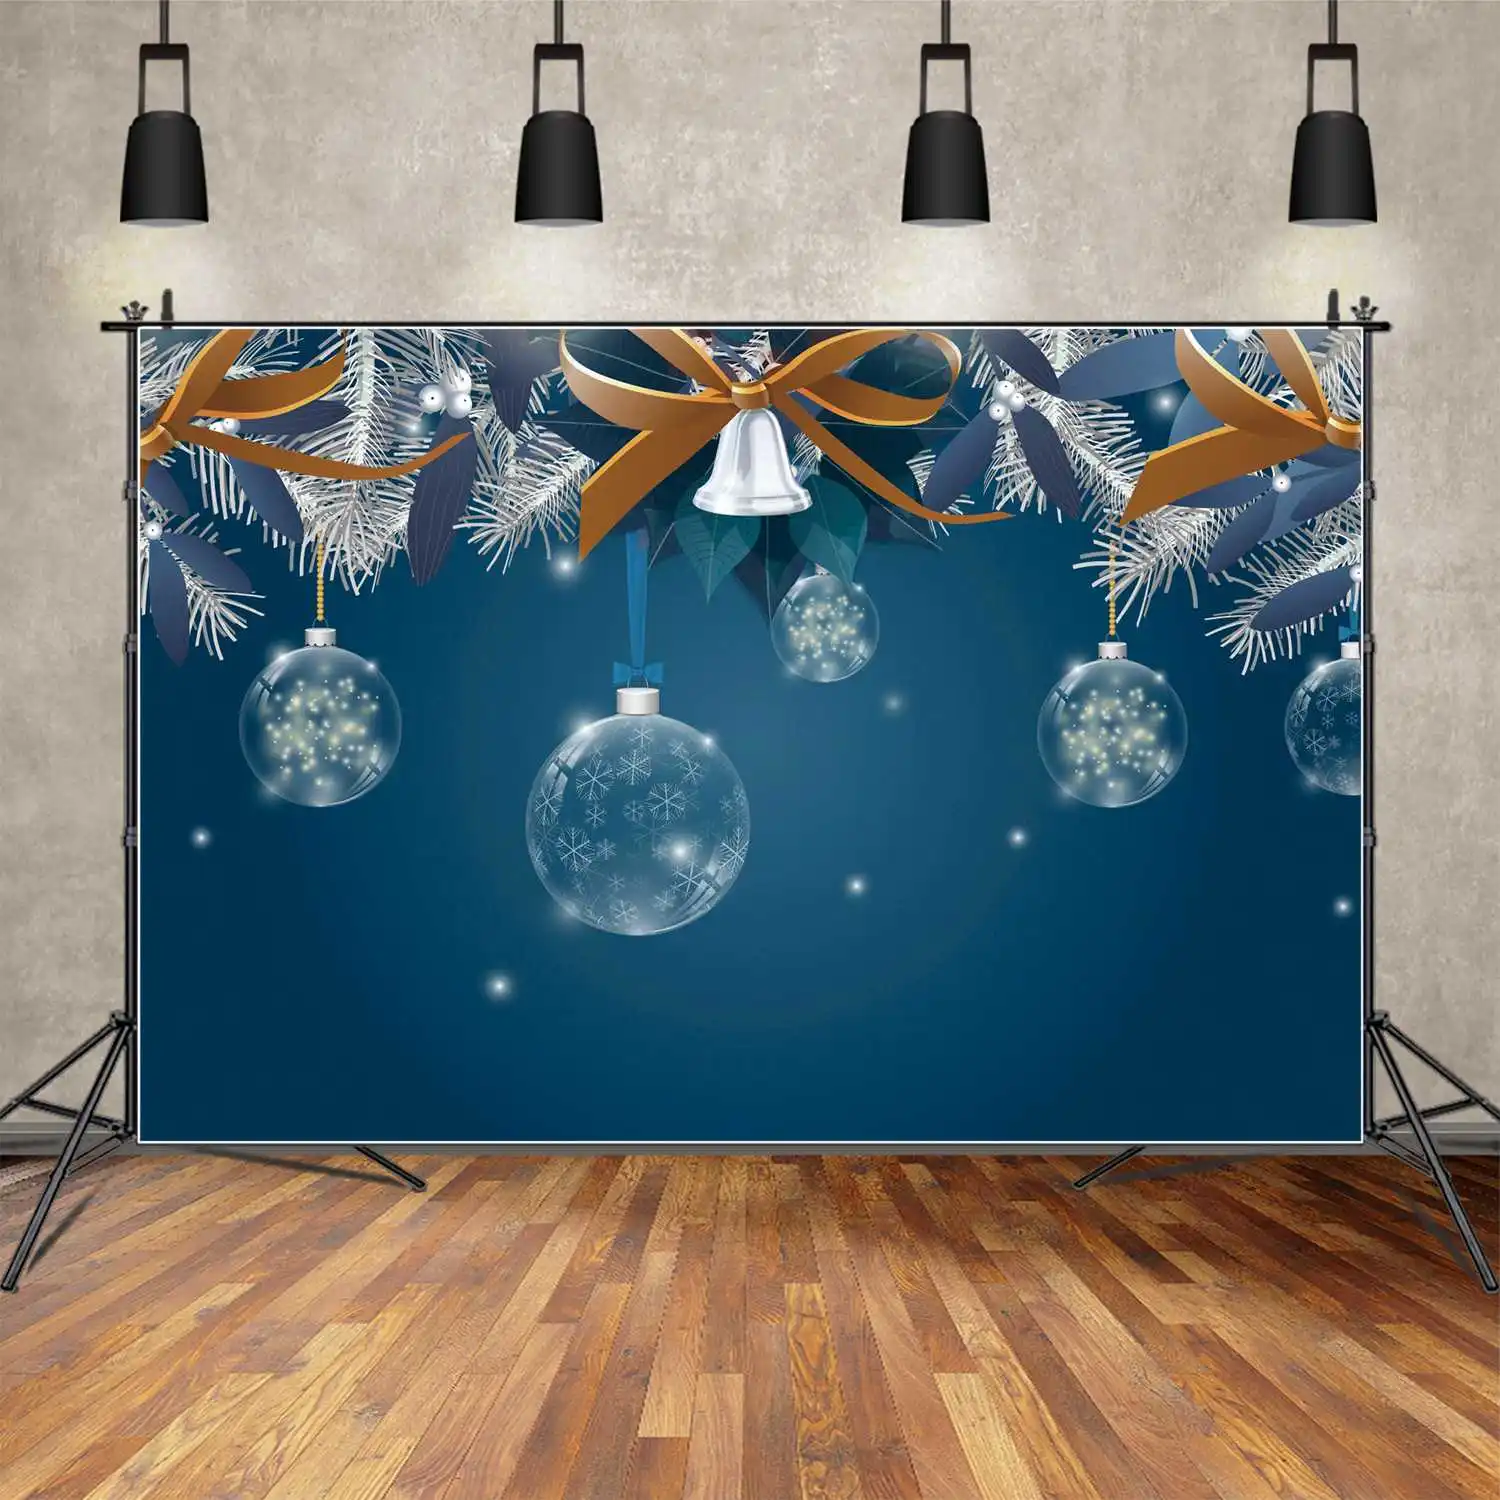 

MOON.QG Backdrop Merry Christmas Blue Snowflake Ball Banner Background Gold Bowknot Silver Leaves Decor Party Photo Booth Props